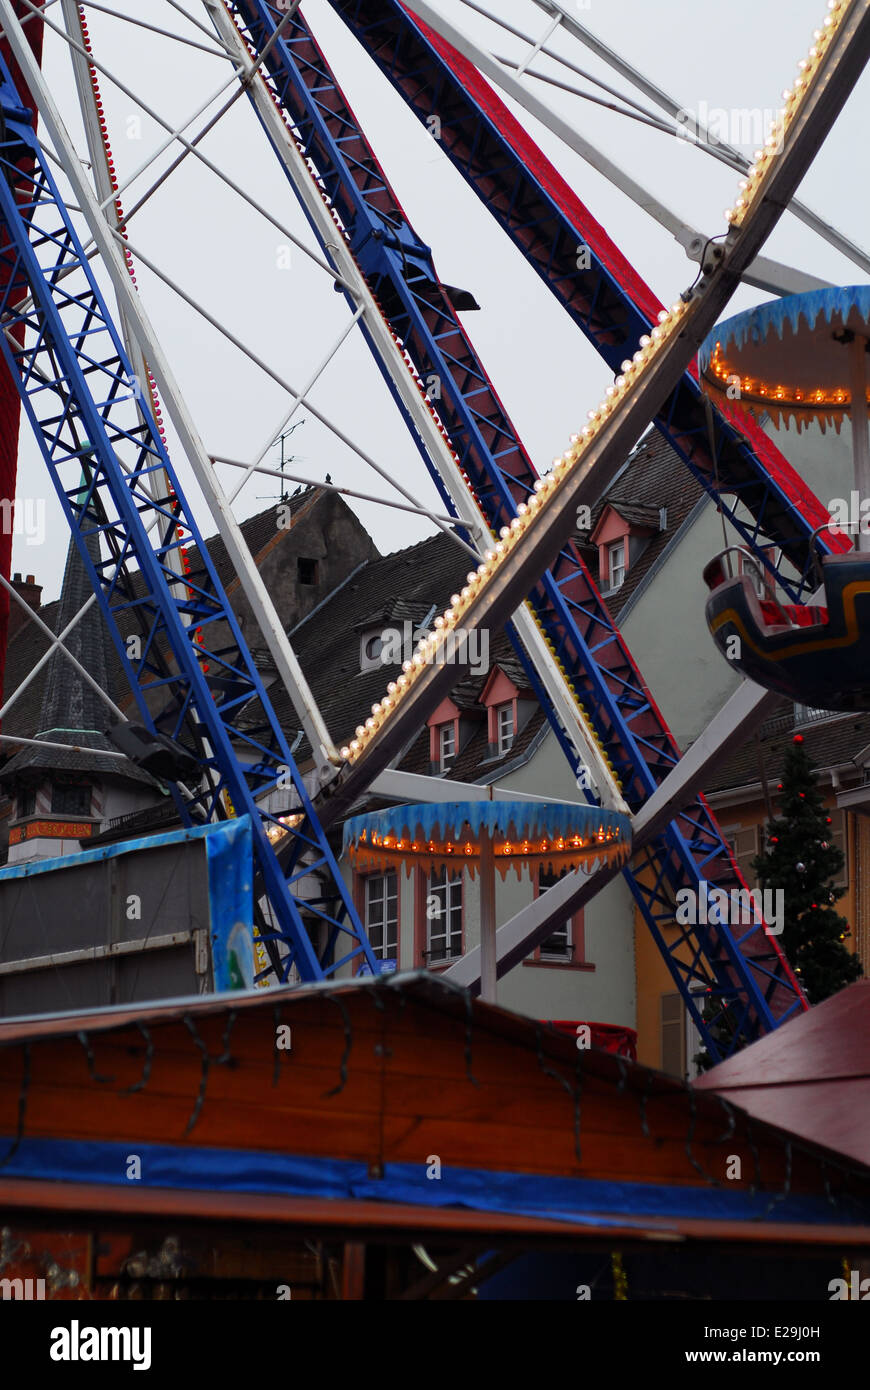 The ferris wheel of the Mulhouse Christmas market, Alsace, France Stock Photo